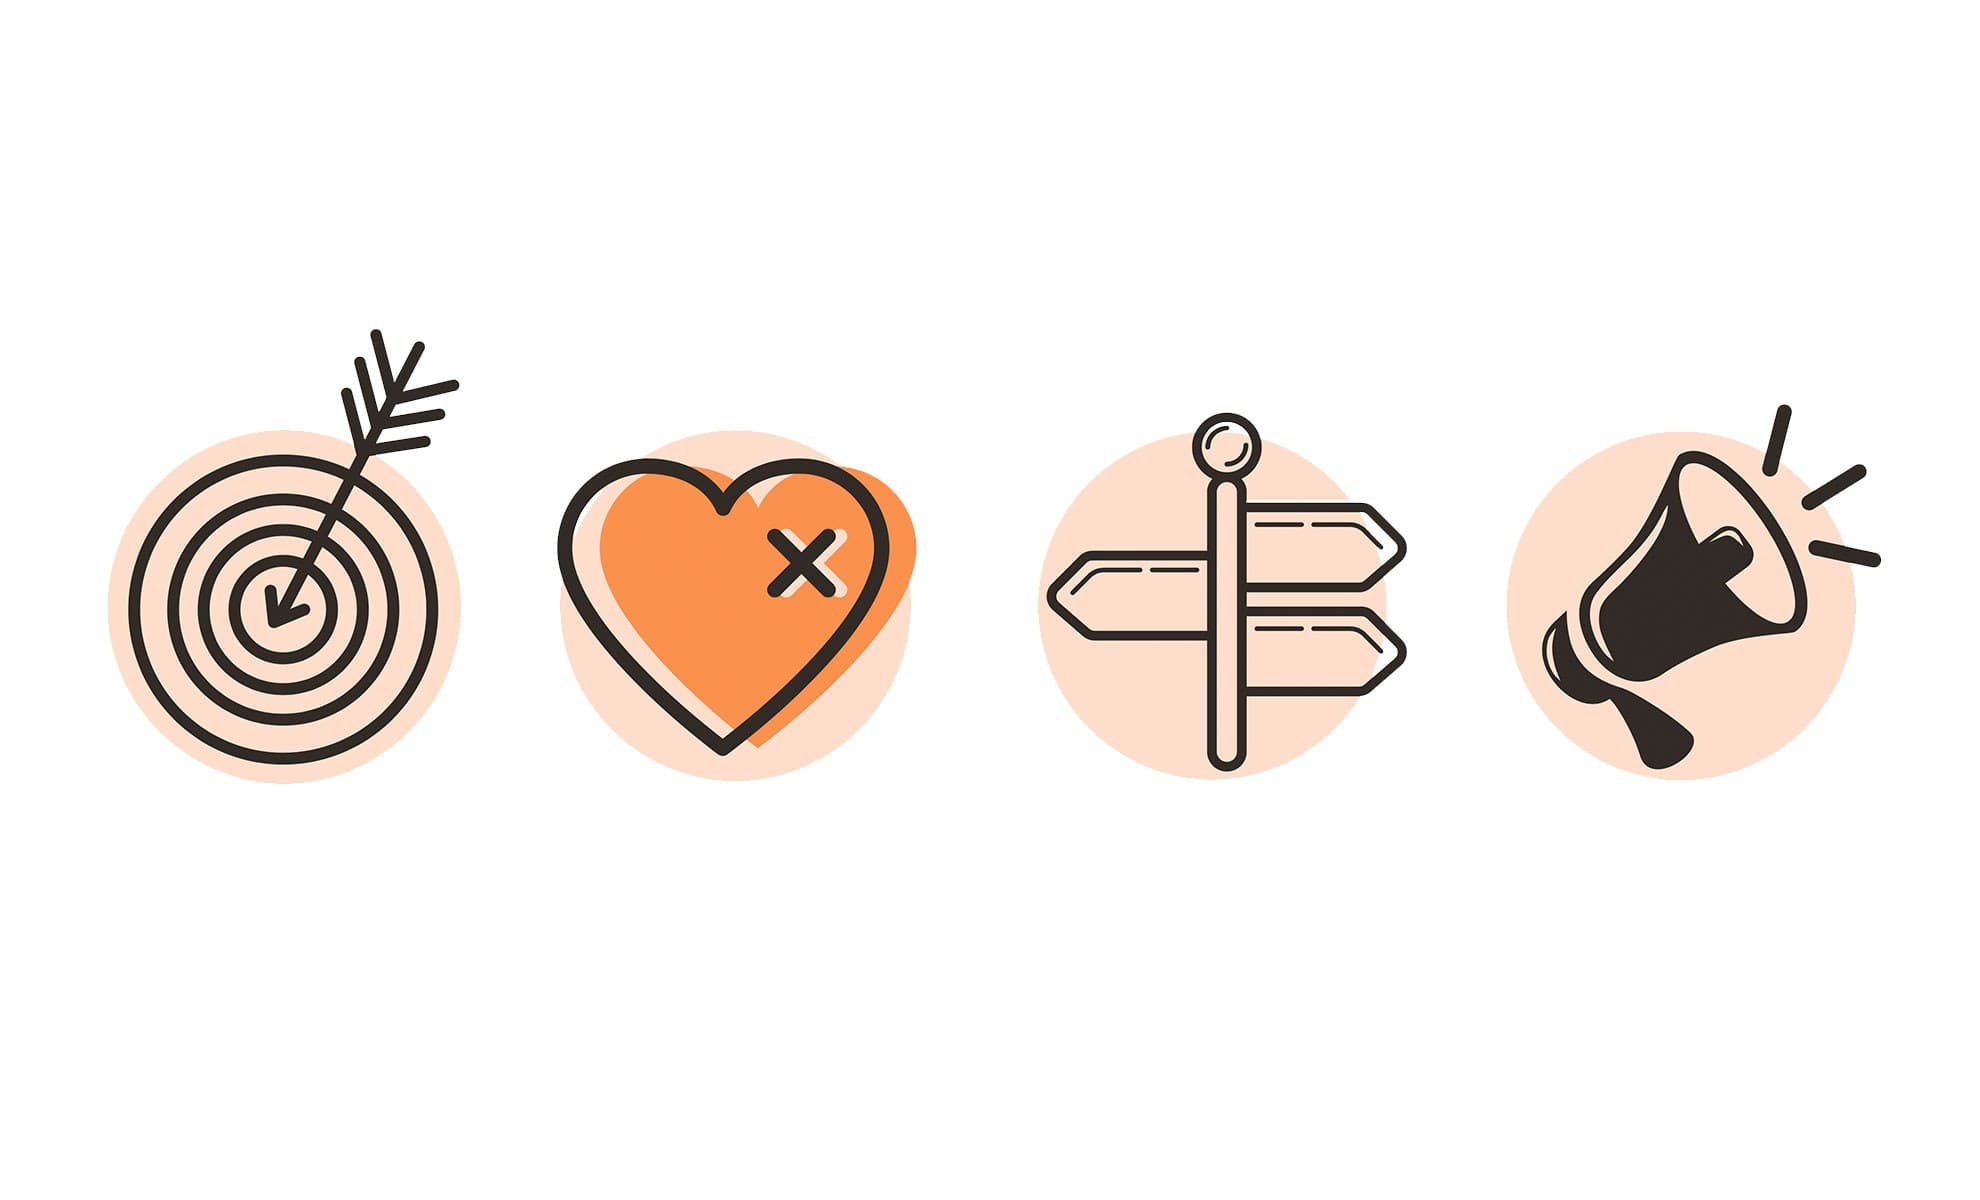 Cultural appropriation icons in a row: an arrow in a bullseye, a heart with an X on one site, a street sign post showing three directions, and a megaphone